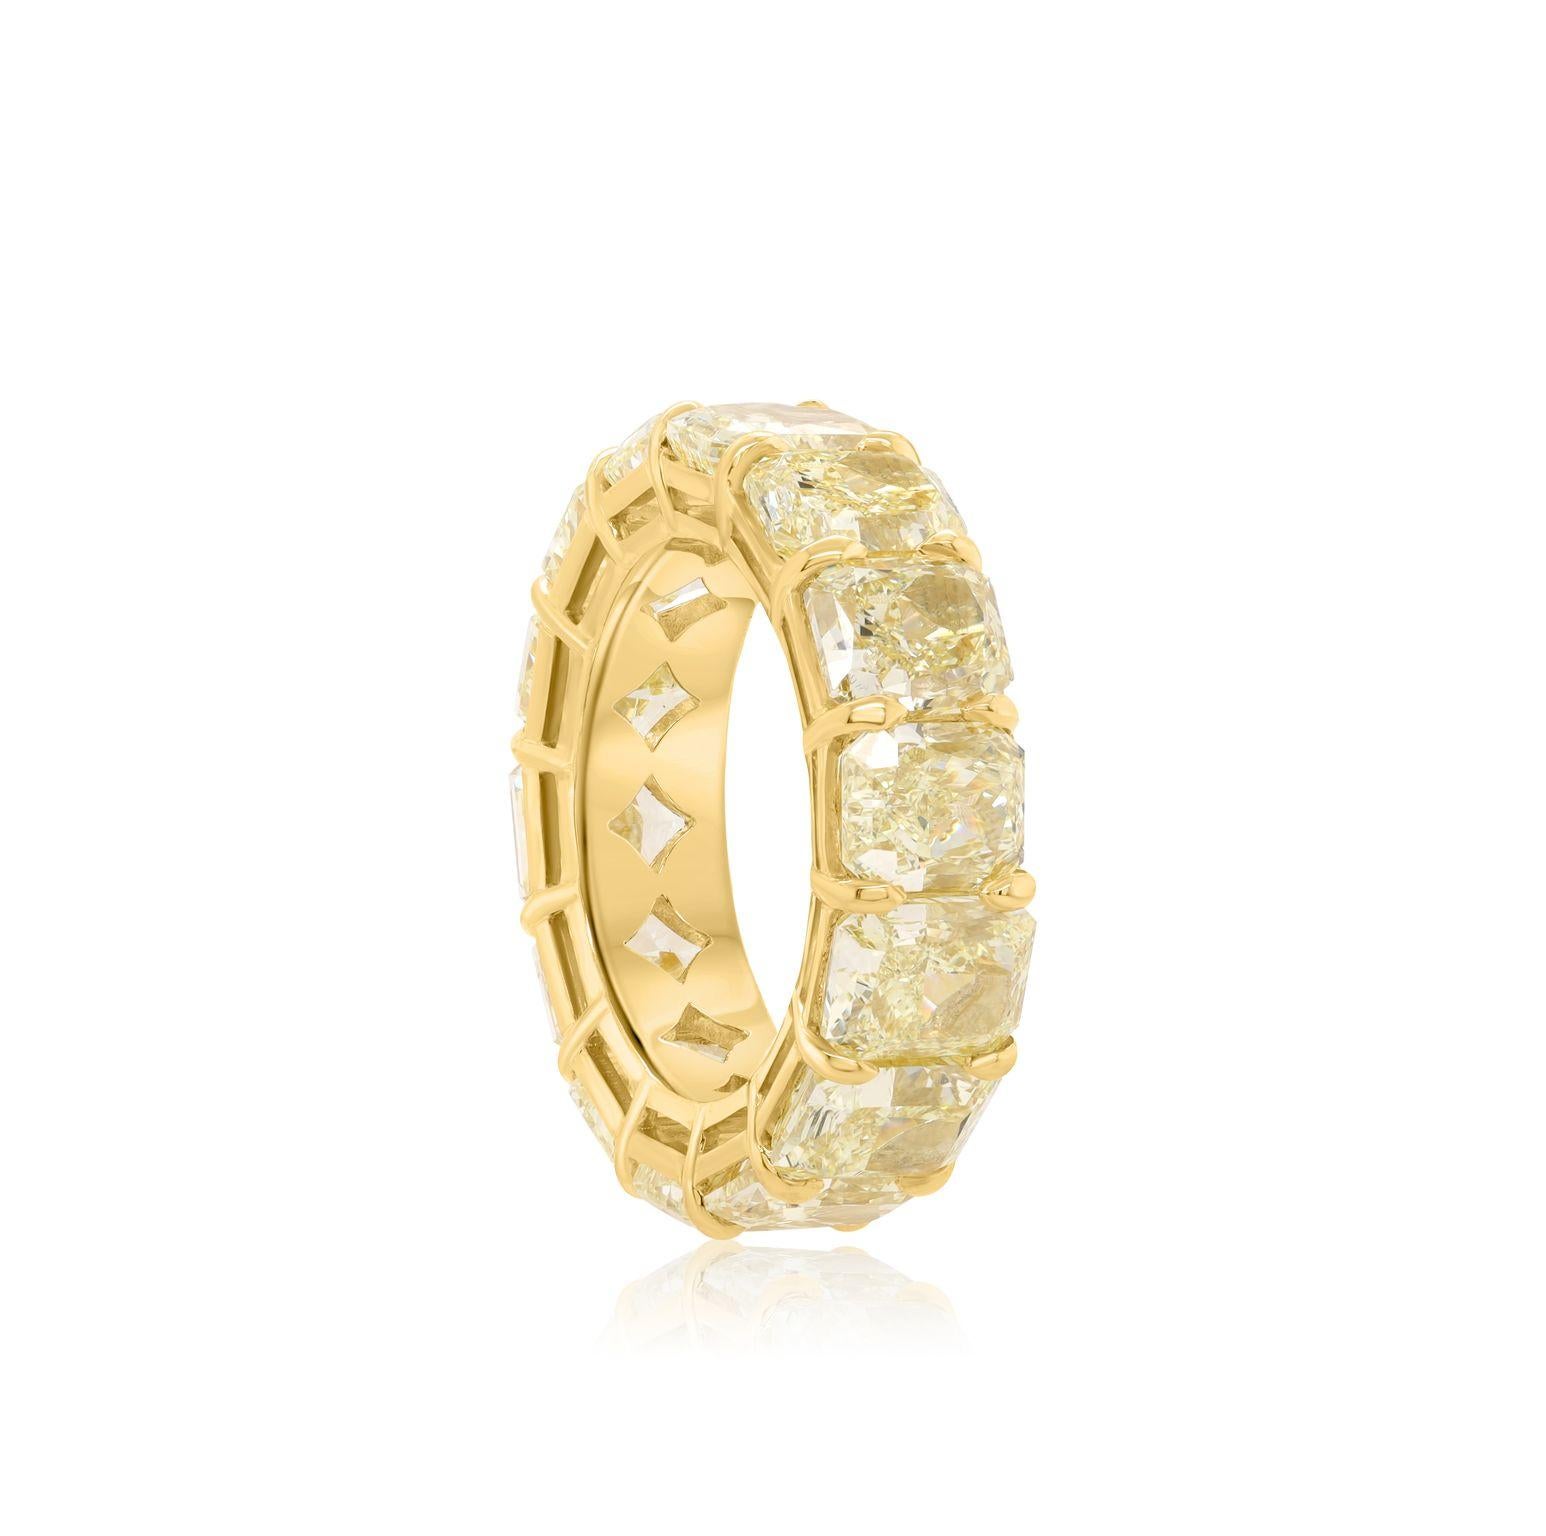 Cushion Cut Diana M. 18 kt yellow gold wedding band featuring 15.38 cts tw of GIA cushions For Sale